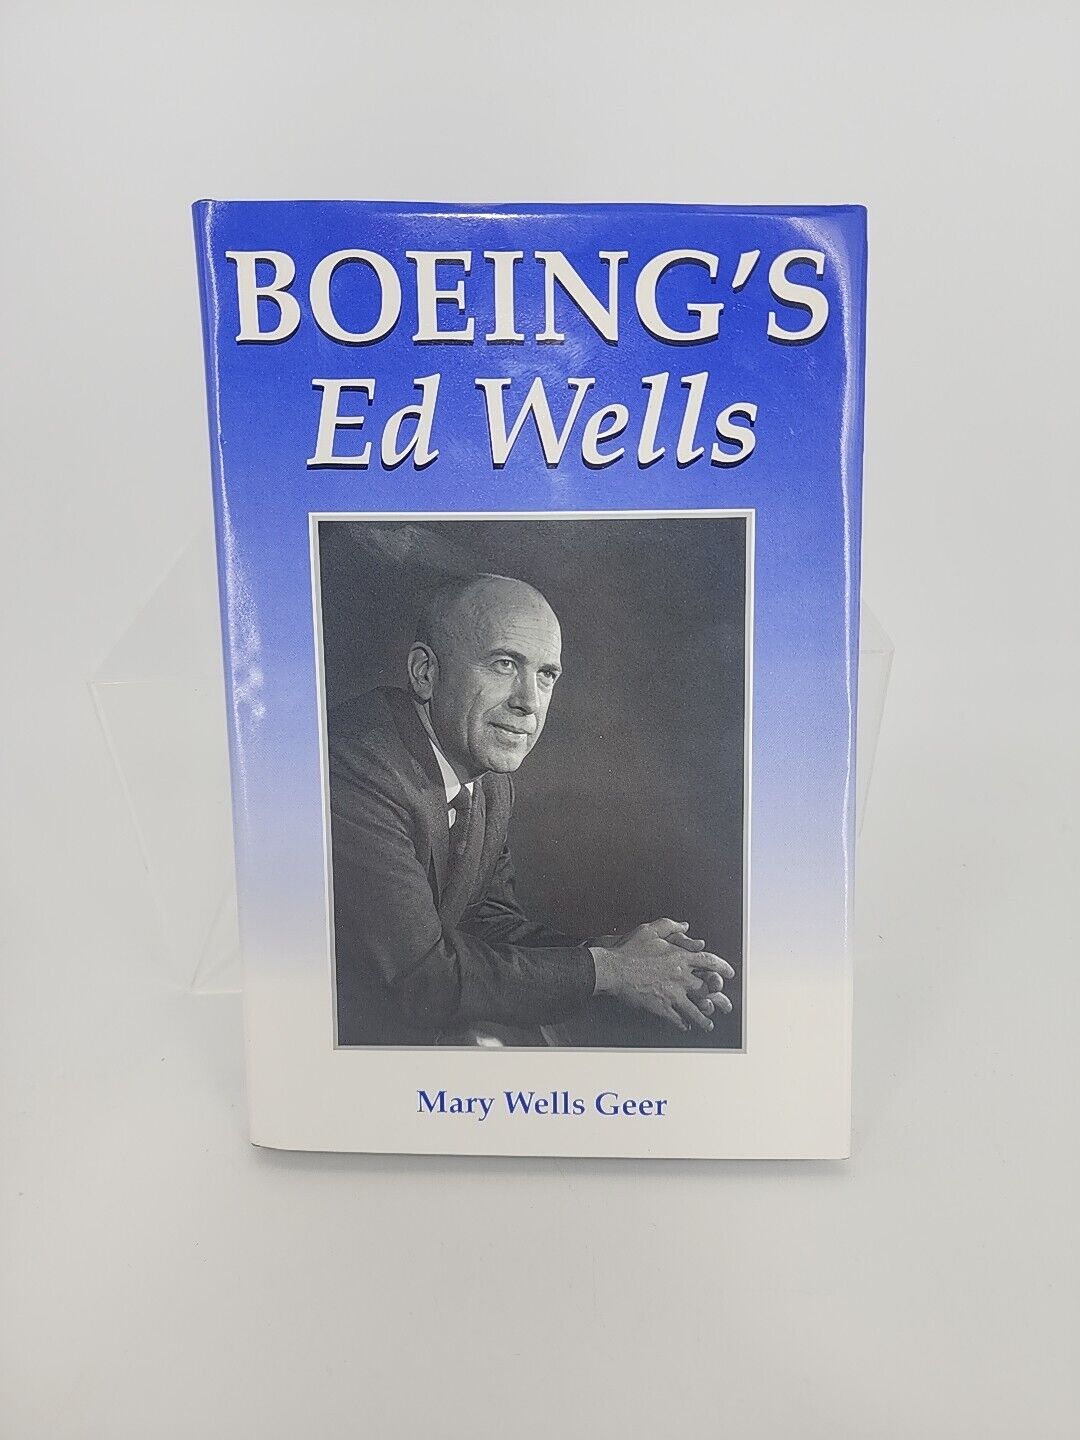 Boeing's Ed Wells by Mary Wells Geer 1992 Hardcover 170 Pages